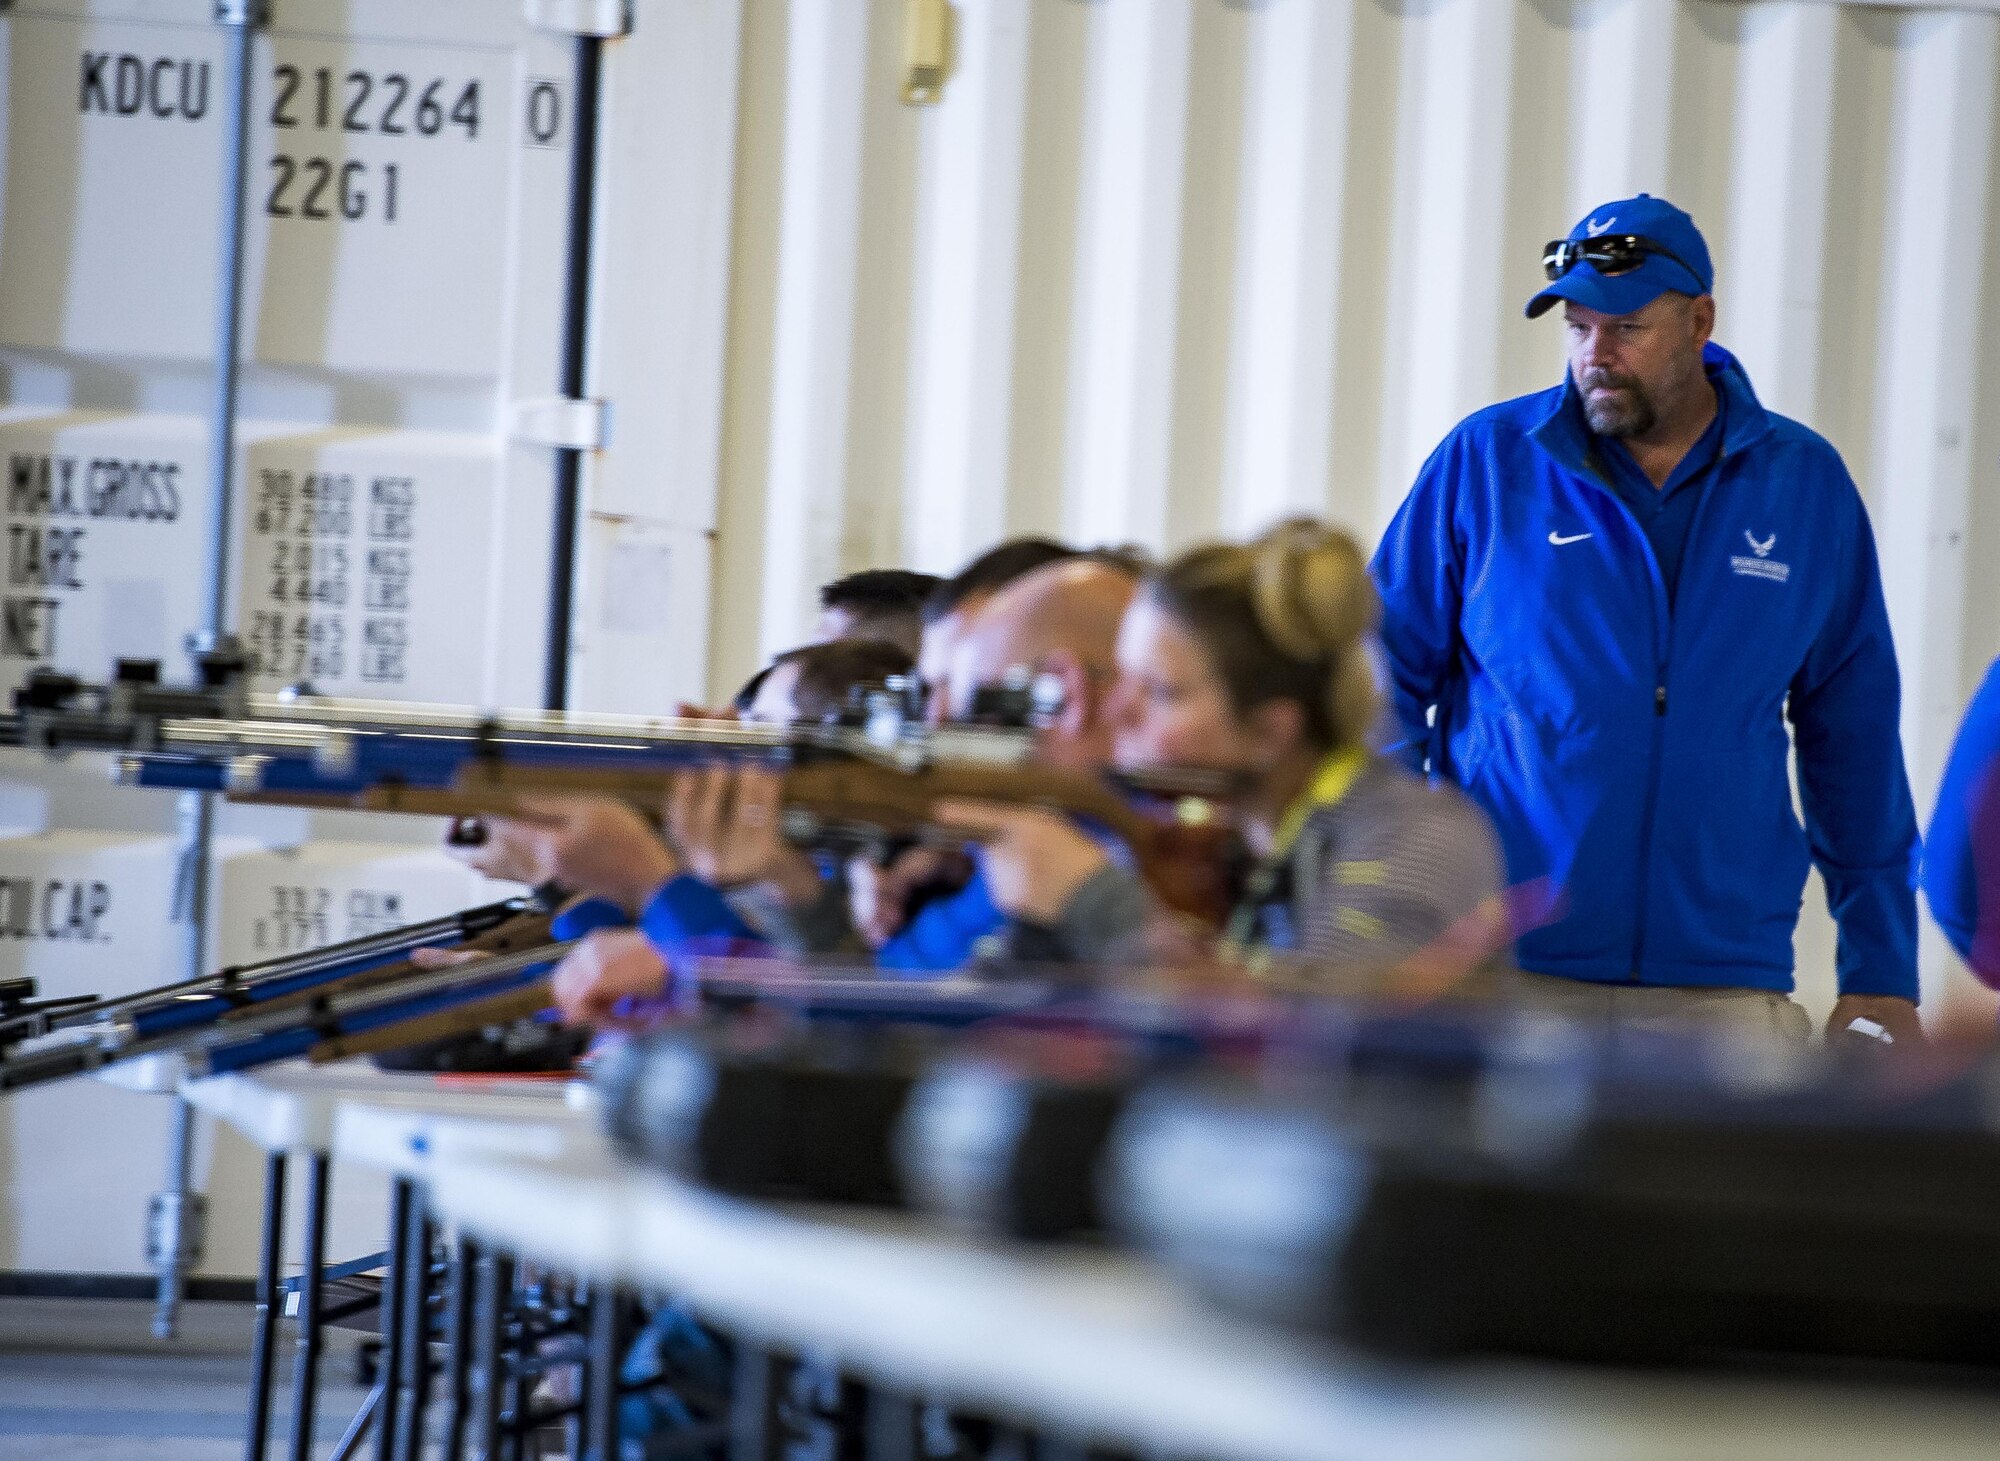 Dan Duitsman, the Air Force Wounded Warrior Program shooting head coach, watches as participants fire air rifles at the Northeast Warrior CARE Event on Joint Base Andrews, Md., Nov. 18, 2016. The AFW2 regional CARE event provided a holistic opportunity for wounded warriors to enhance the four domains -- physical, mental, spiritual and social – of Comprehensive Airman Fitness. (U.S. Air Force photo/Staff Sgt. Christopher Gross)